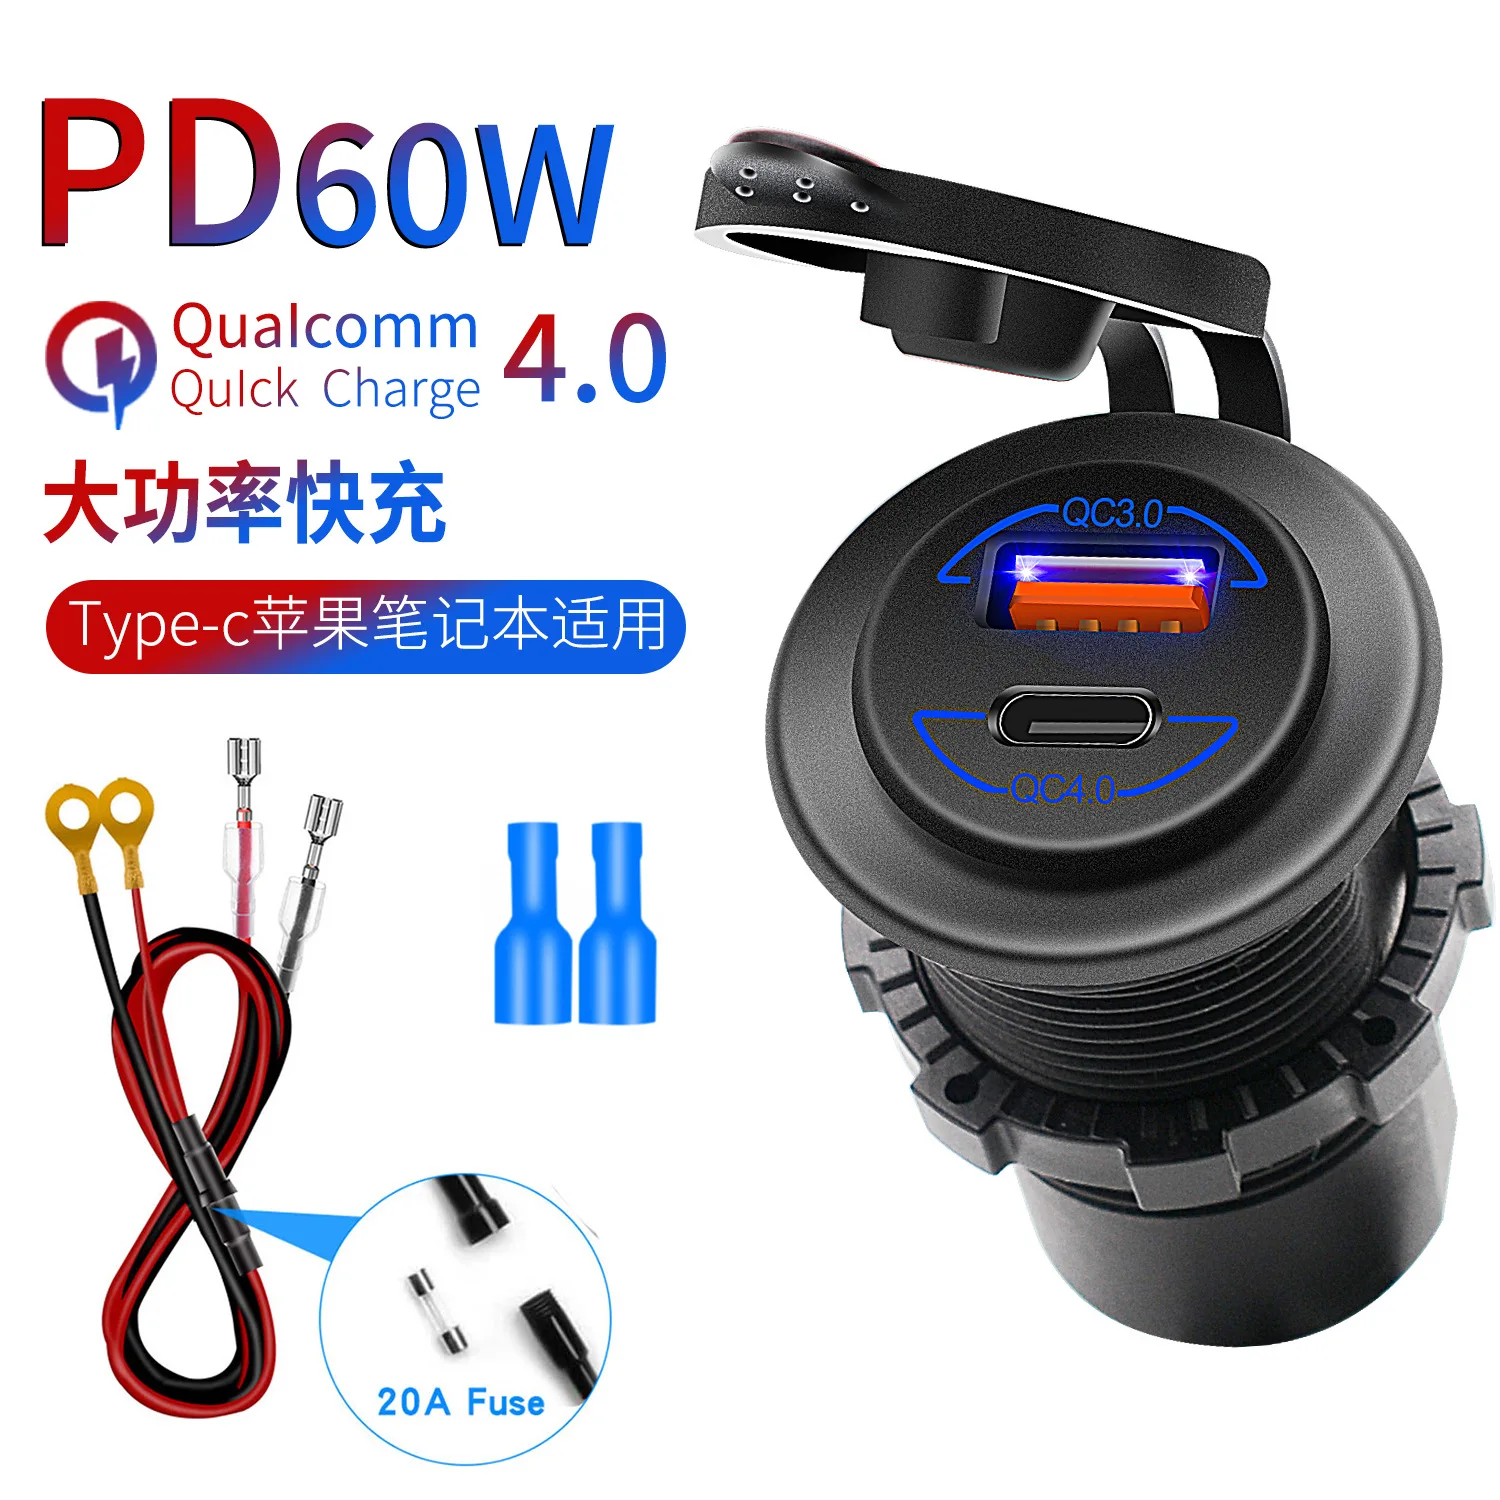 

60W Dual USB Charger Socket Waterproof QC3.0 PD4.0 Adapter Outlet for cars, motorcycles, ATVs, RVs, SUVs, boats, yachts, etc.